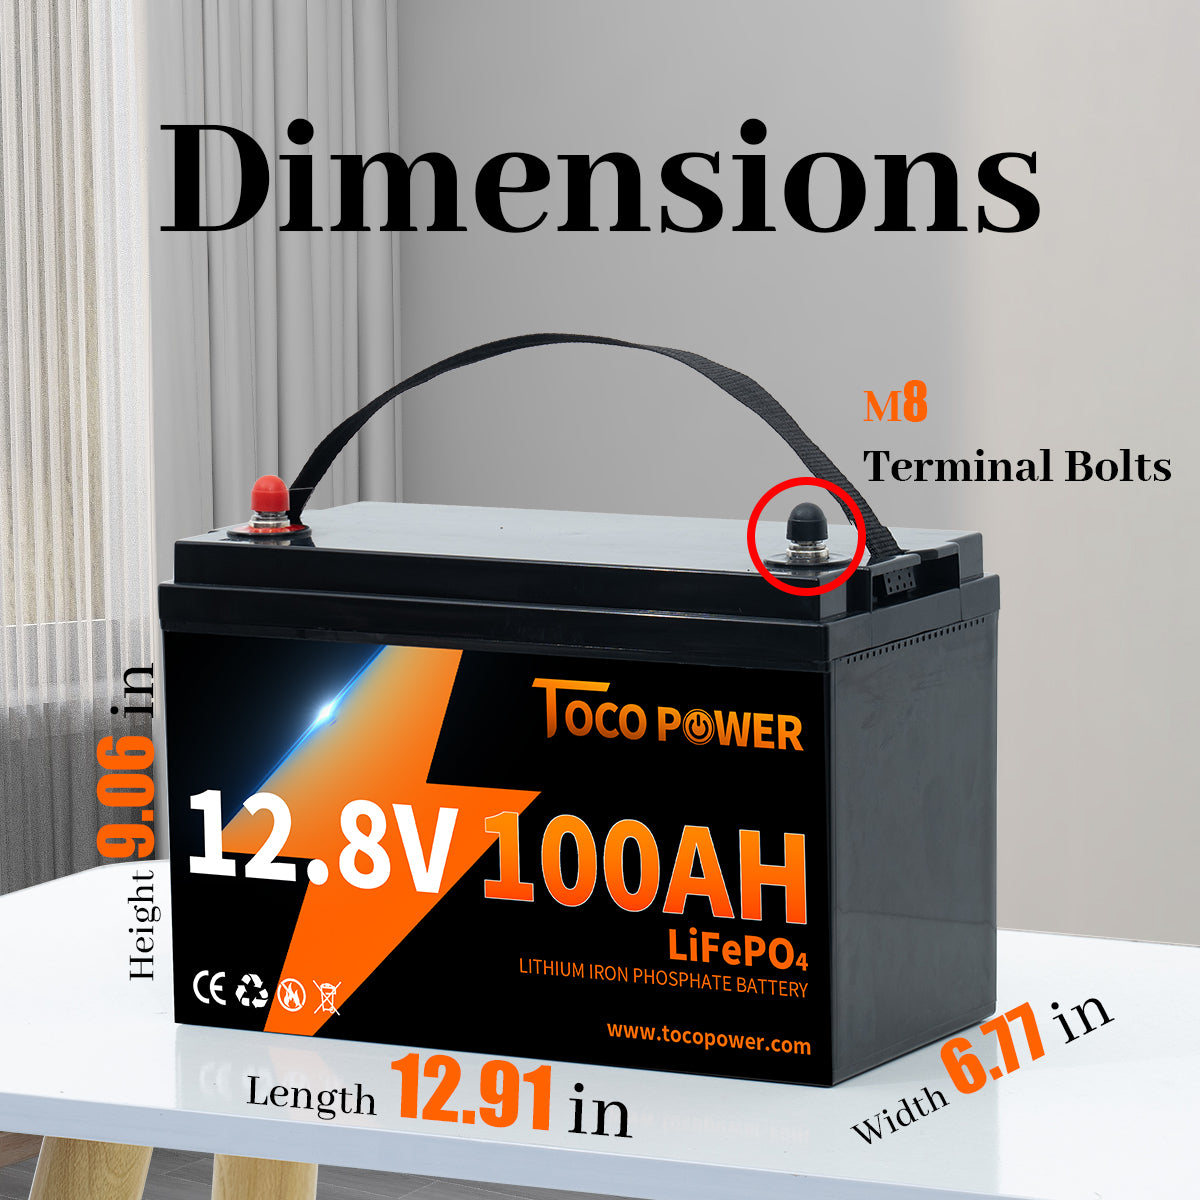 Tocopower 12V 100Ah LiFePO4 Lithium Battery